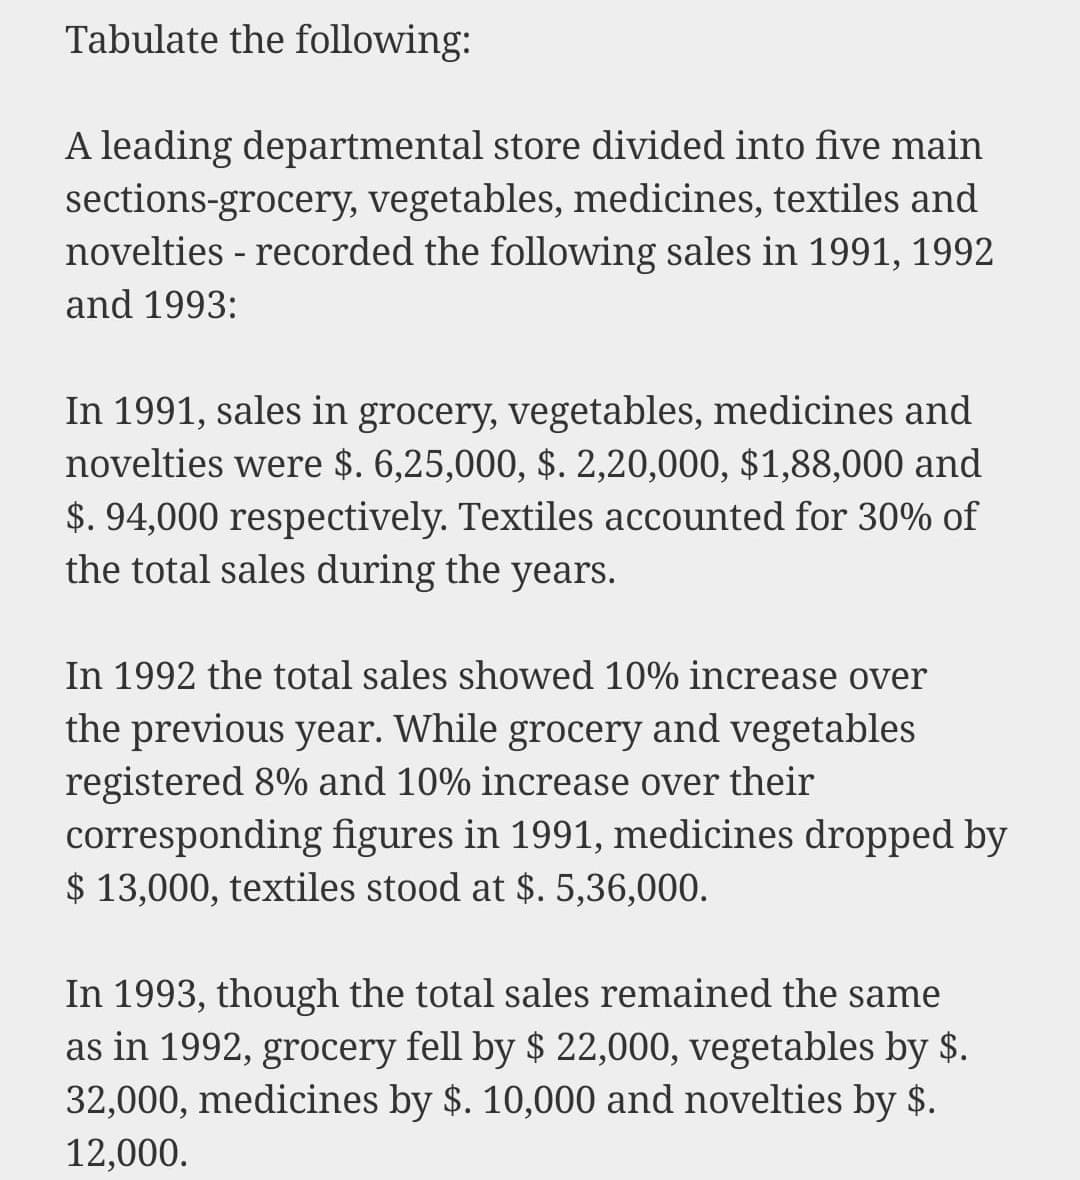 Tabulate the following:
A leading departmental store divided into five main
sections-grocery, vegetables, medicines, textiles and
novelties - recorded the following sales in 1991, 1992
and 1993:
In 1991, sales in grocery, vegetables, medicines and
novelties were $. 6,25,000, $. 2,20,000, $1,88,000 and
$. 94,000 respectively. Textiles accounted for 30% of
the total sales during the years.
In 1992 the total sales showed 10% increase over
the previous year. While grocery and vegetables
registered 8% and 10% increase over their
corresponding figures in 1991, medicines dropped by
$ 13,000, textiles stood at $. 5,36,000.
In 1993, though the total sales remained the same
as in 1992, grocery fell by $ 22,000, vegetables by $.
32,000, medicines by $. 10,000 and novelties by $.
12,000.
